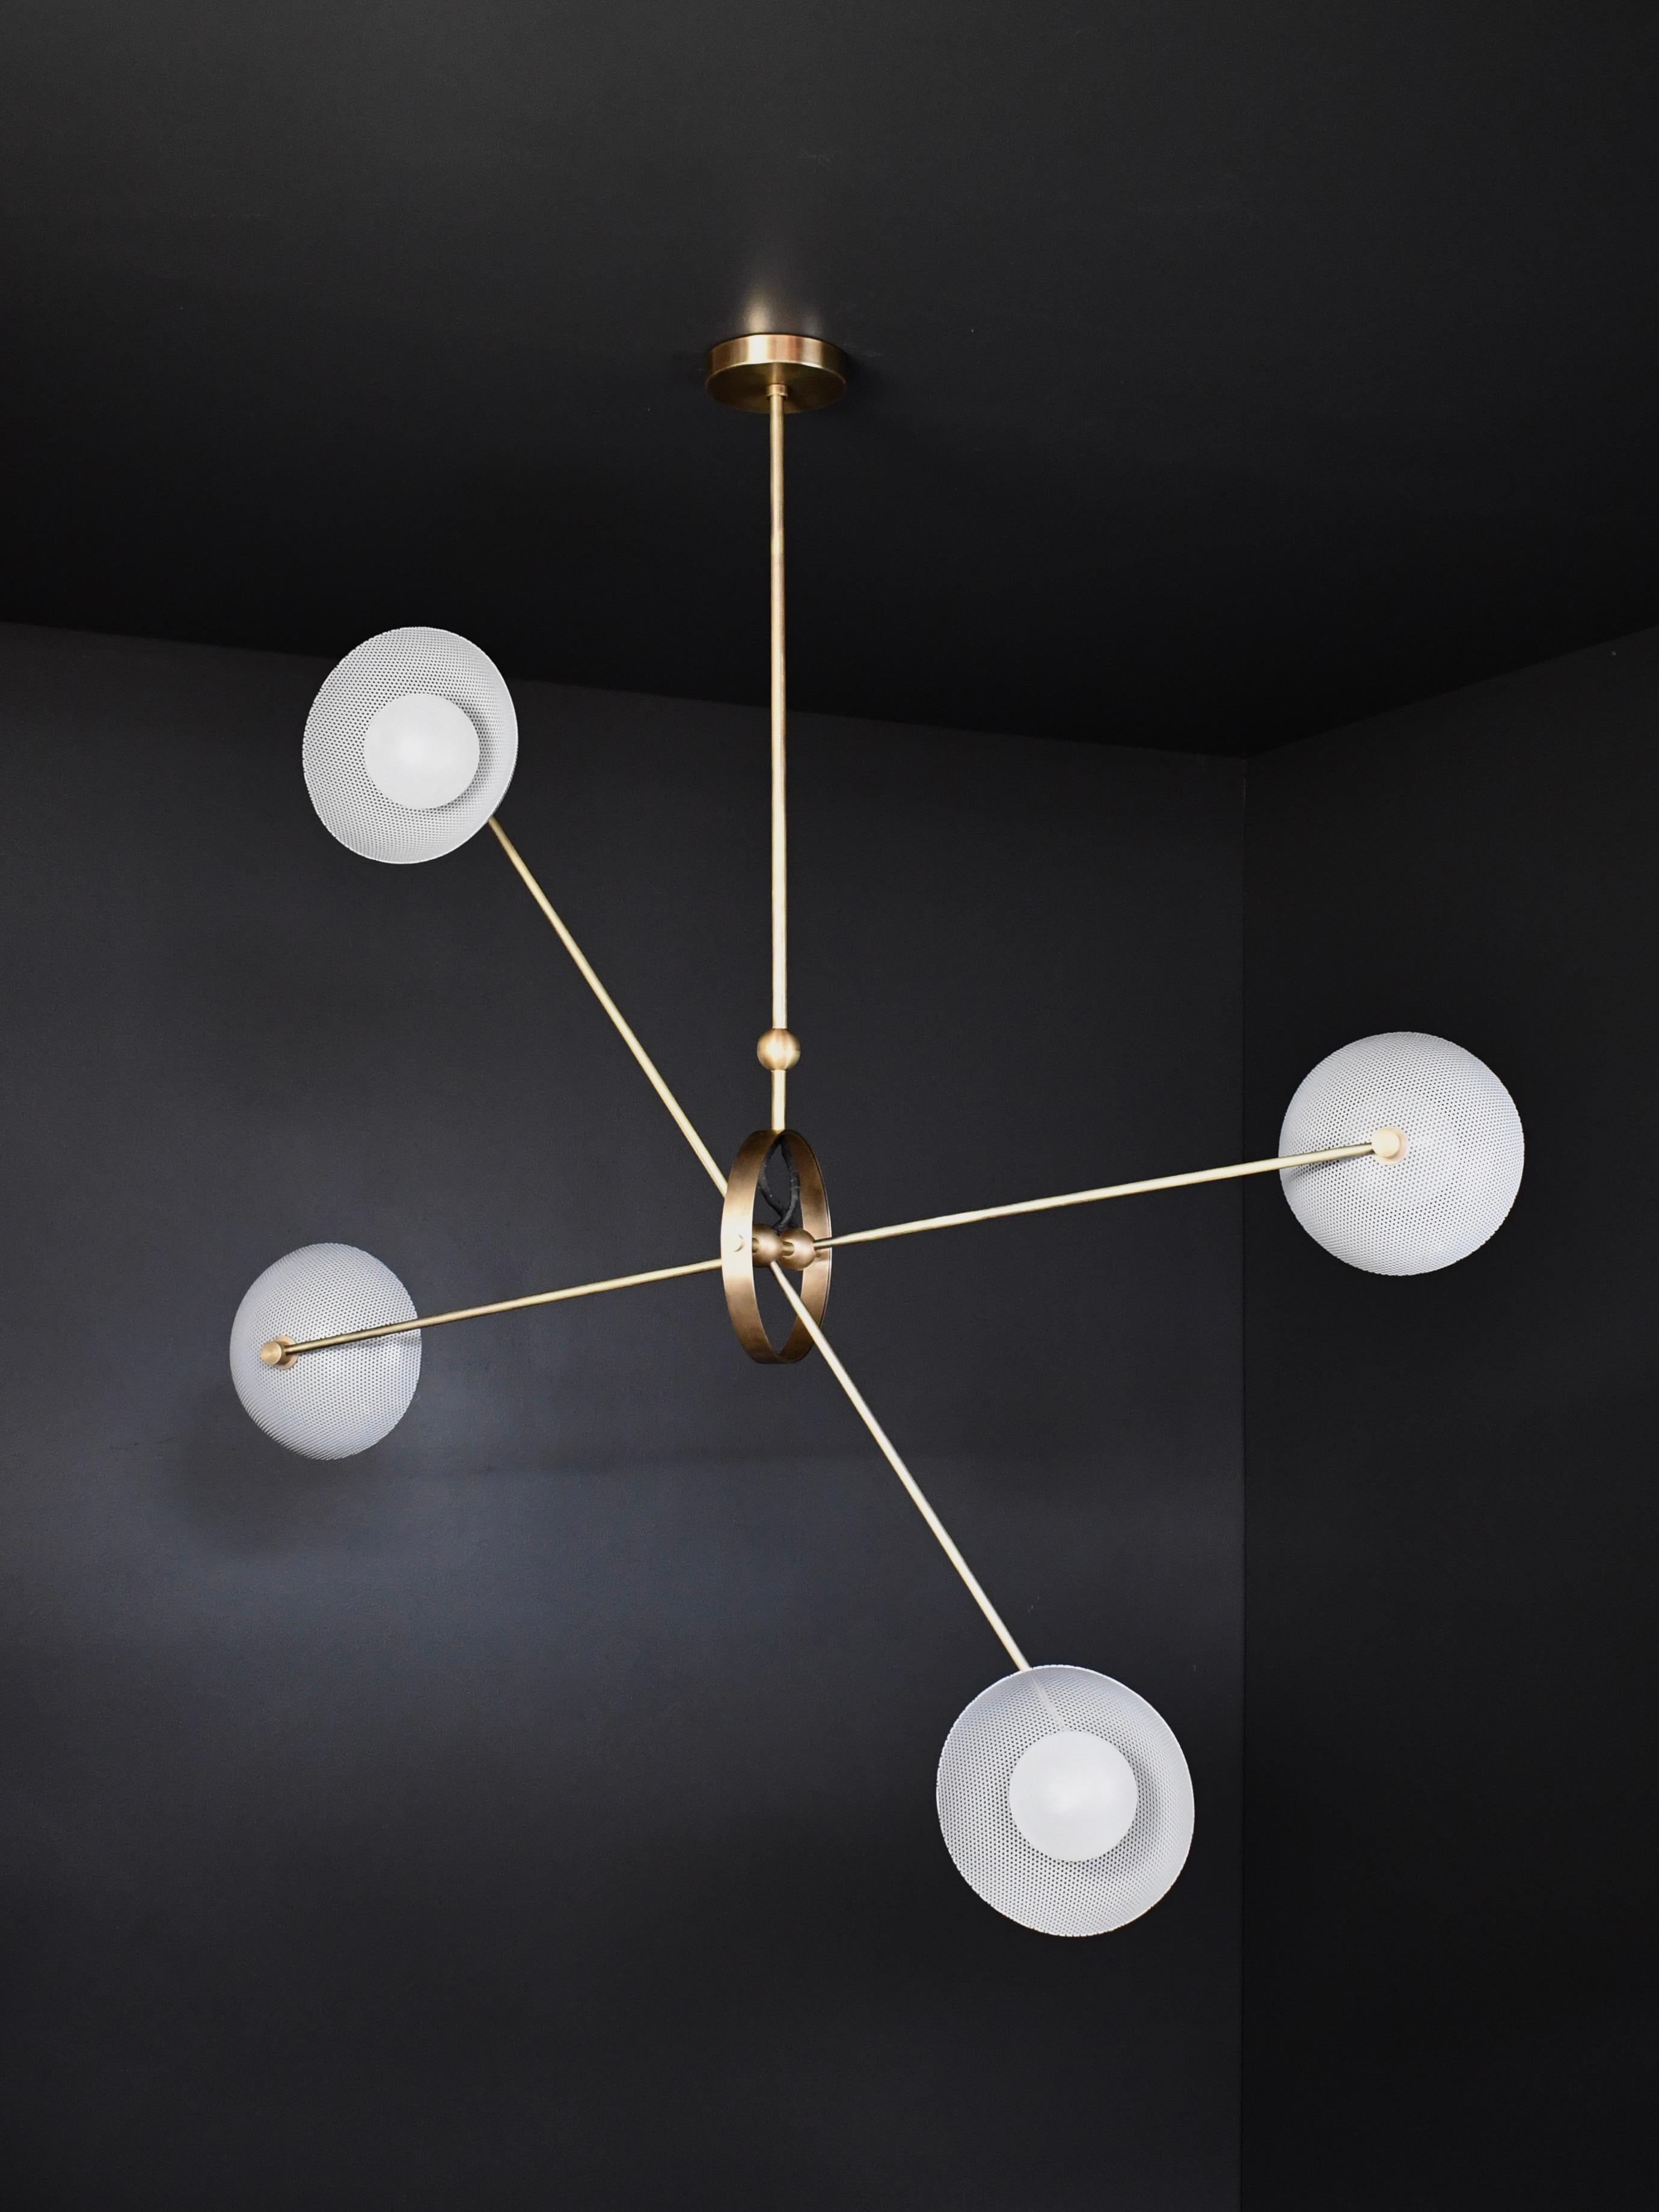 The Parallax ceiling fixture conveys a strong modern design defined by balance and equilibrium, a functional sculpture suspended in space. Parallax features four bowl-shaped shades fabricated of spun metal mesh ensconcing blown opal glass orbs.